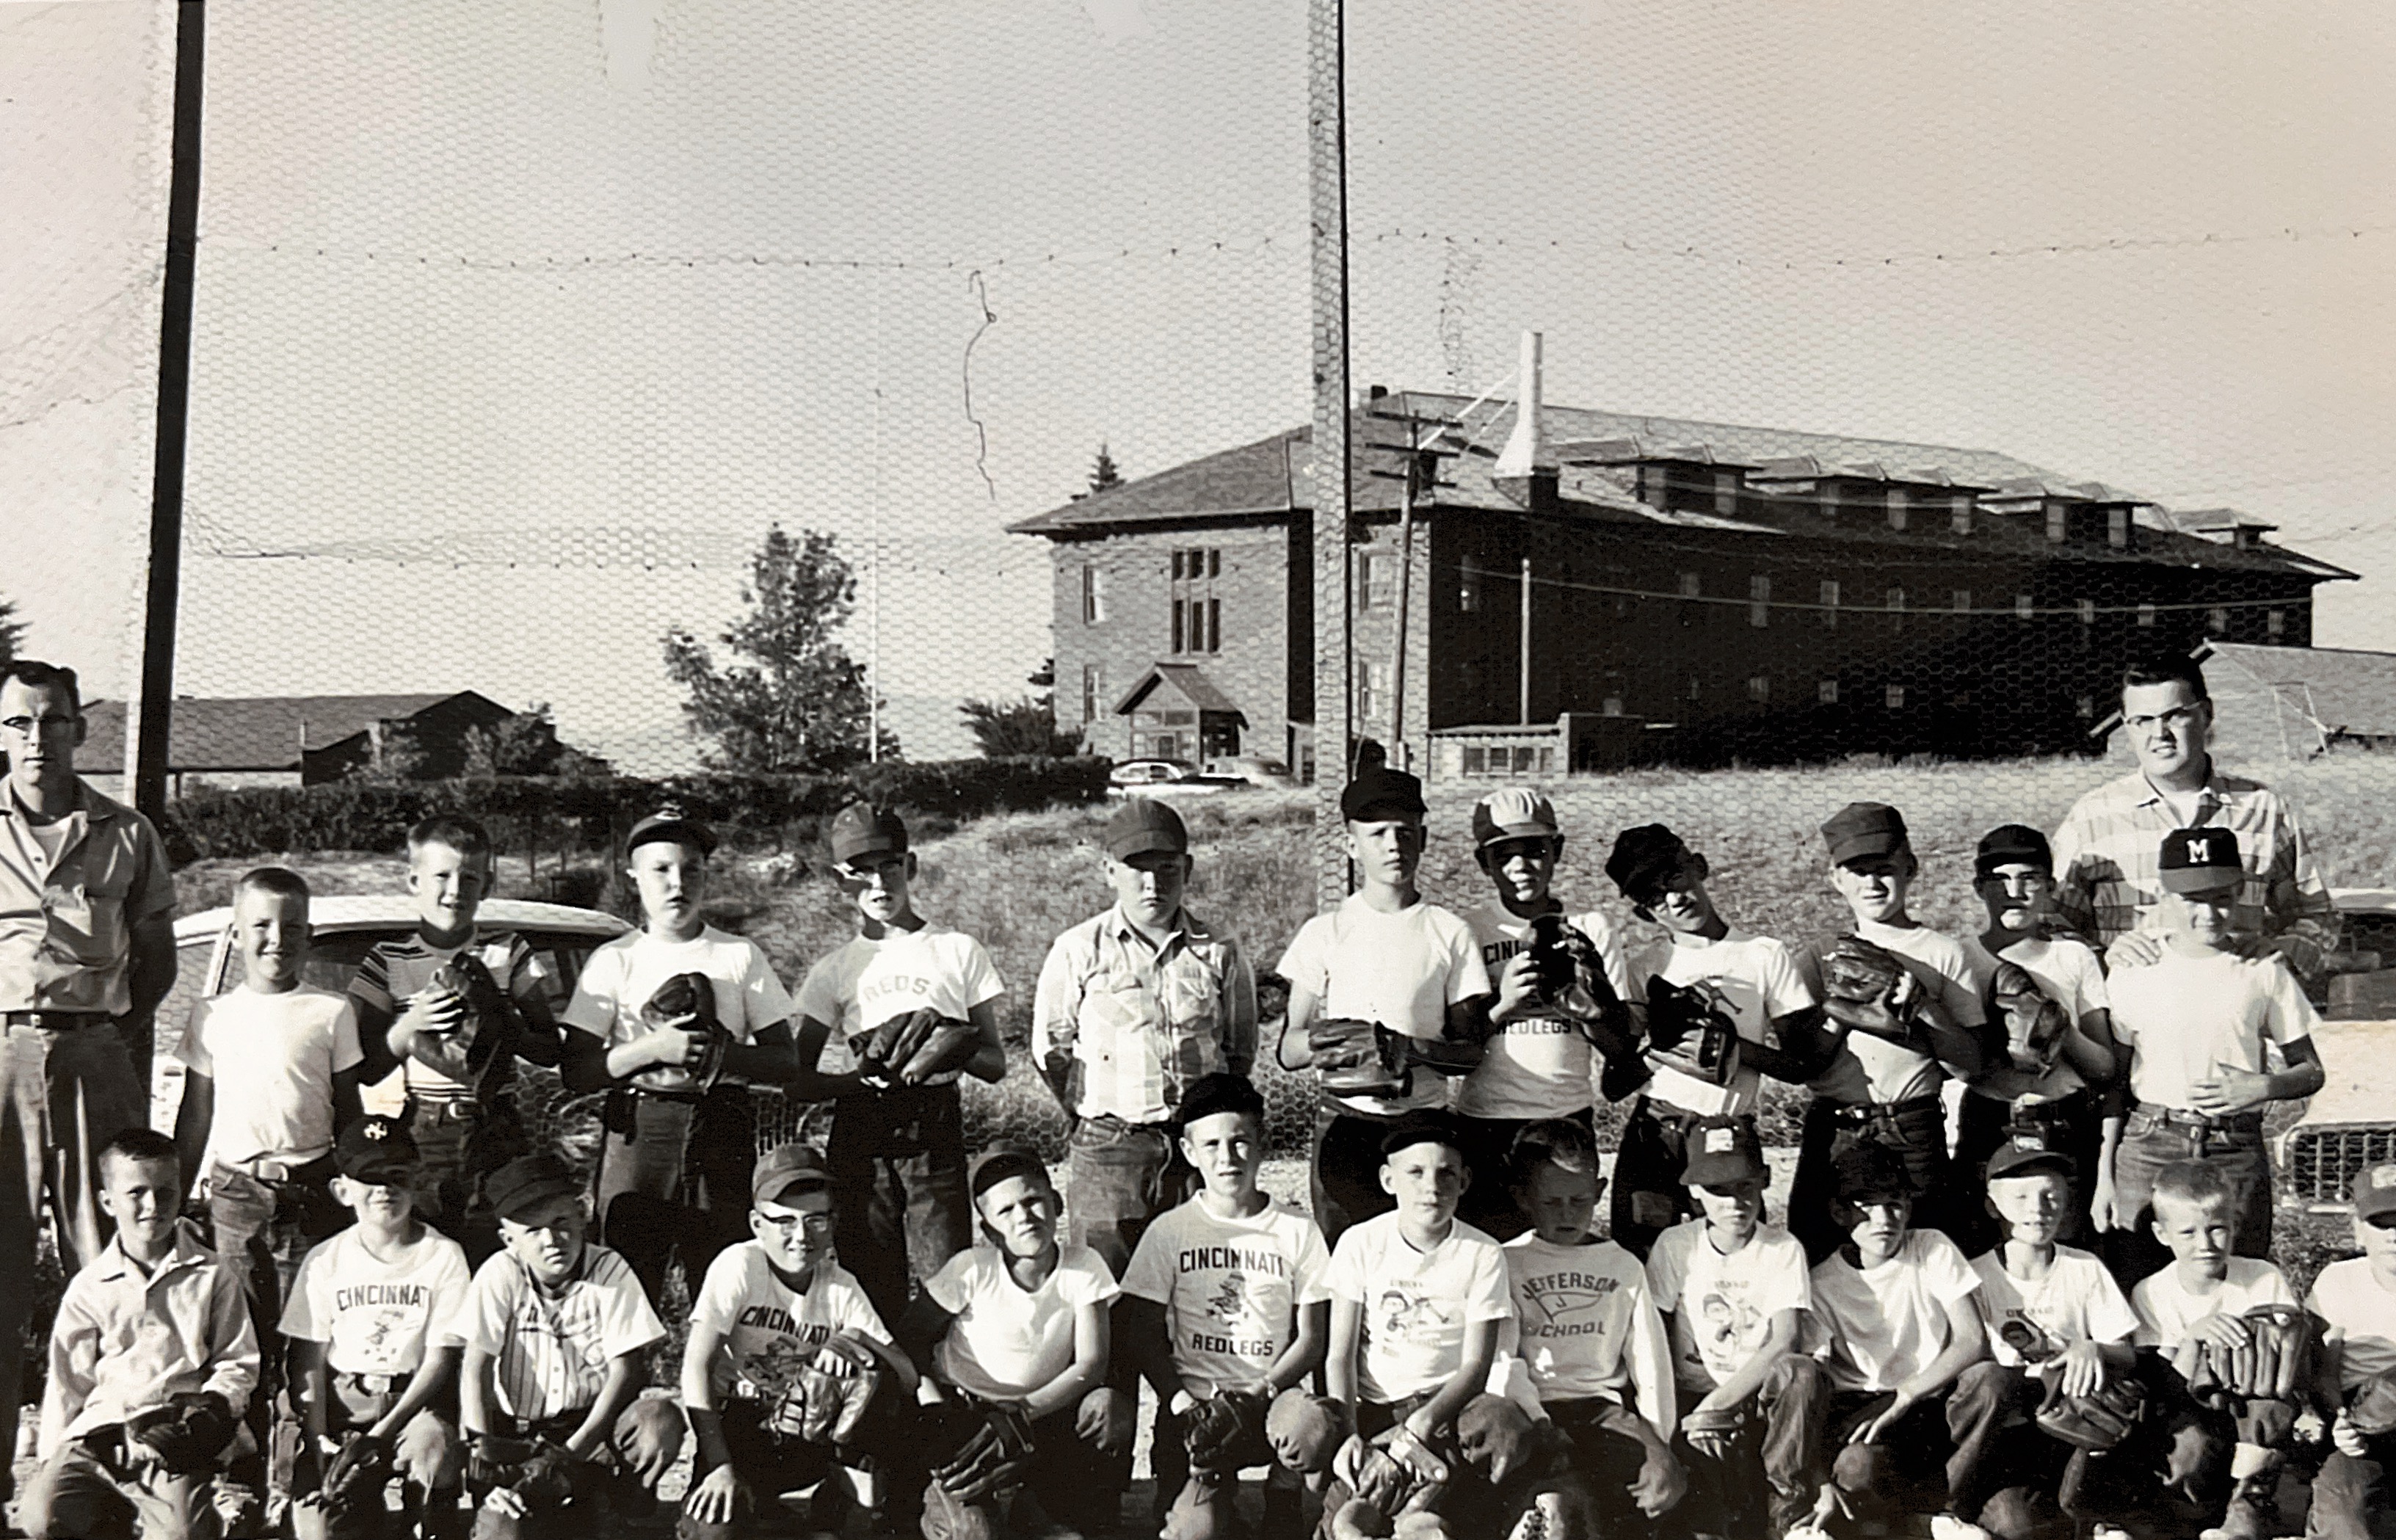 Star Motel Field approximately 1957ish. Corner of 9th and Sanders, Helena, MT. Mike is at end of top row on far right, Tom is right below him. Rick is 4th from left bottom row, Mike McGinley is far L bottom row. Grandpa Jack Nilan is coach on left.  Grandpa Jacks car was a 1955 Chevy Stationwagon.